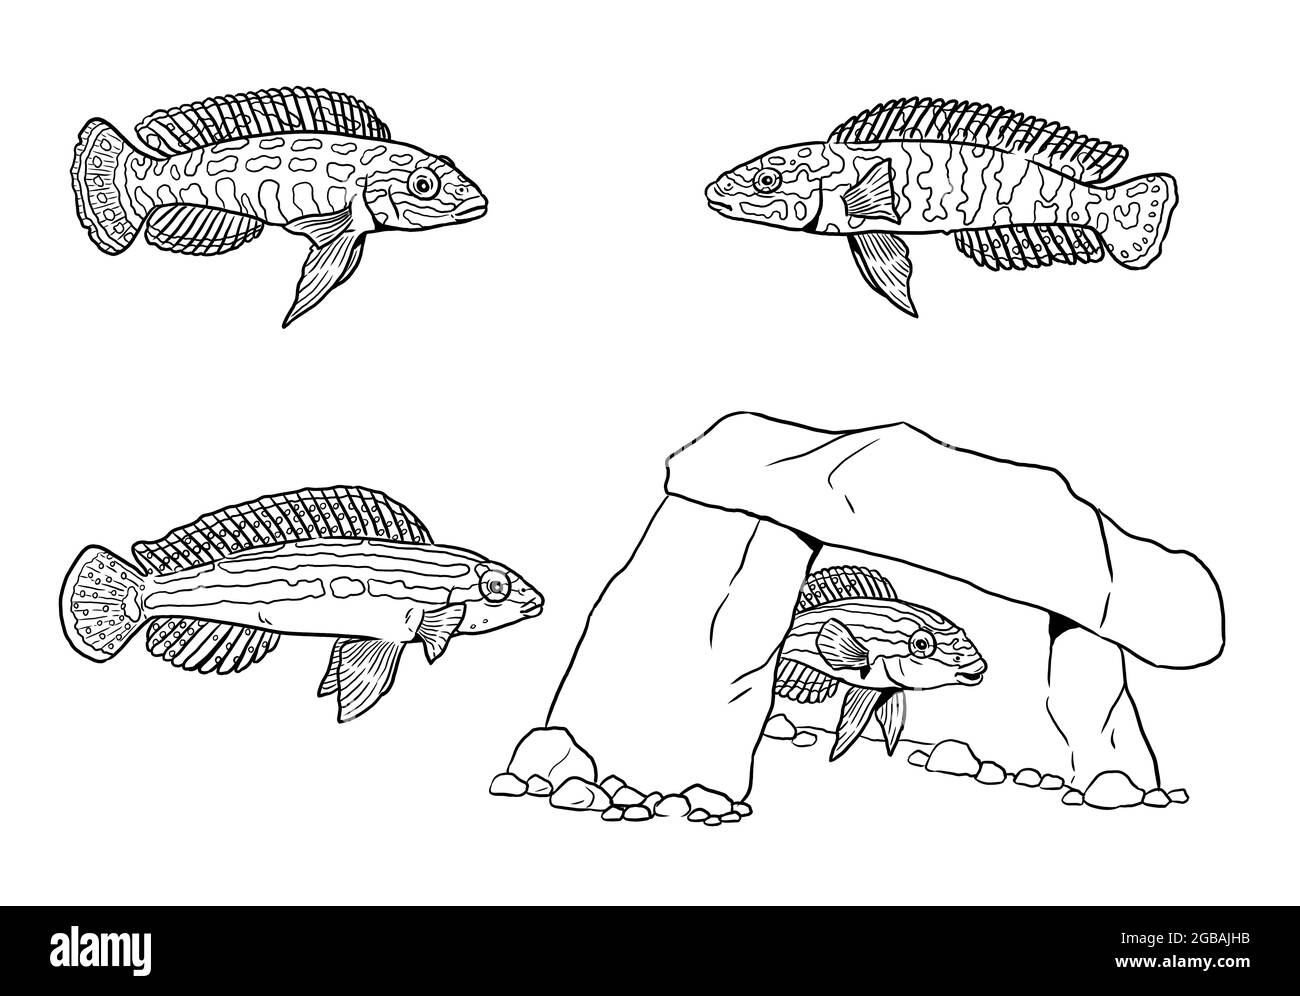 Сichlids from the Tanganyika lake for coloring. Colorful african fish Julidochromis. Coloring book for children and adults. Stock Photo